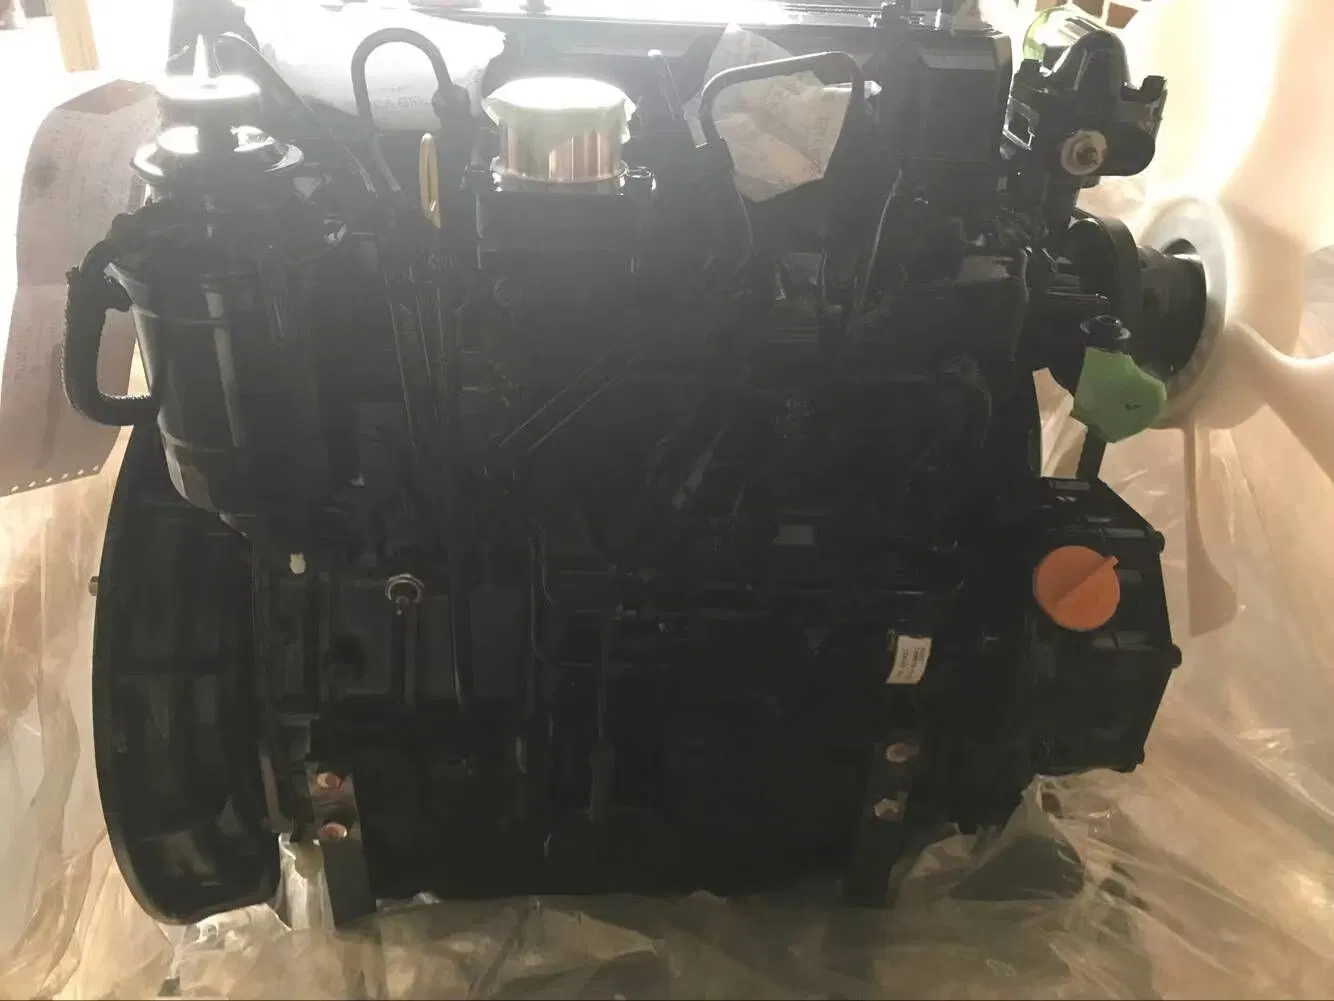 Yanmar Diesel Engines 4tnv98 Are Used in Marine Engines Mini Digger Auto Parts